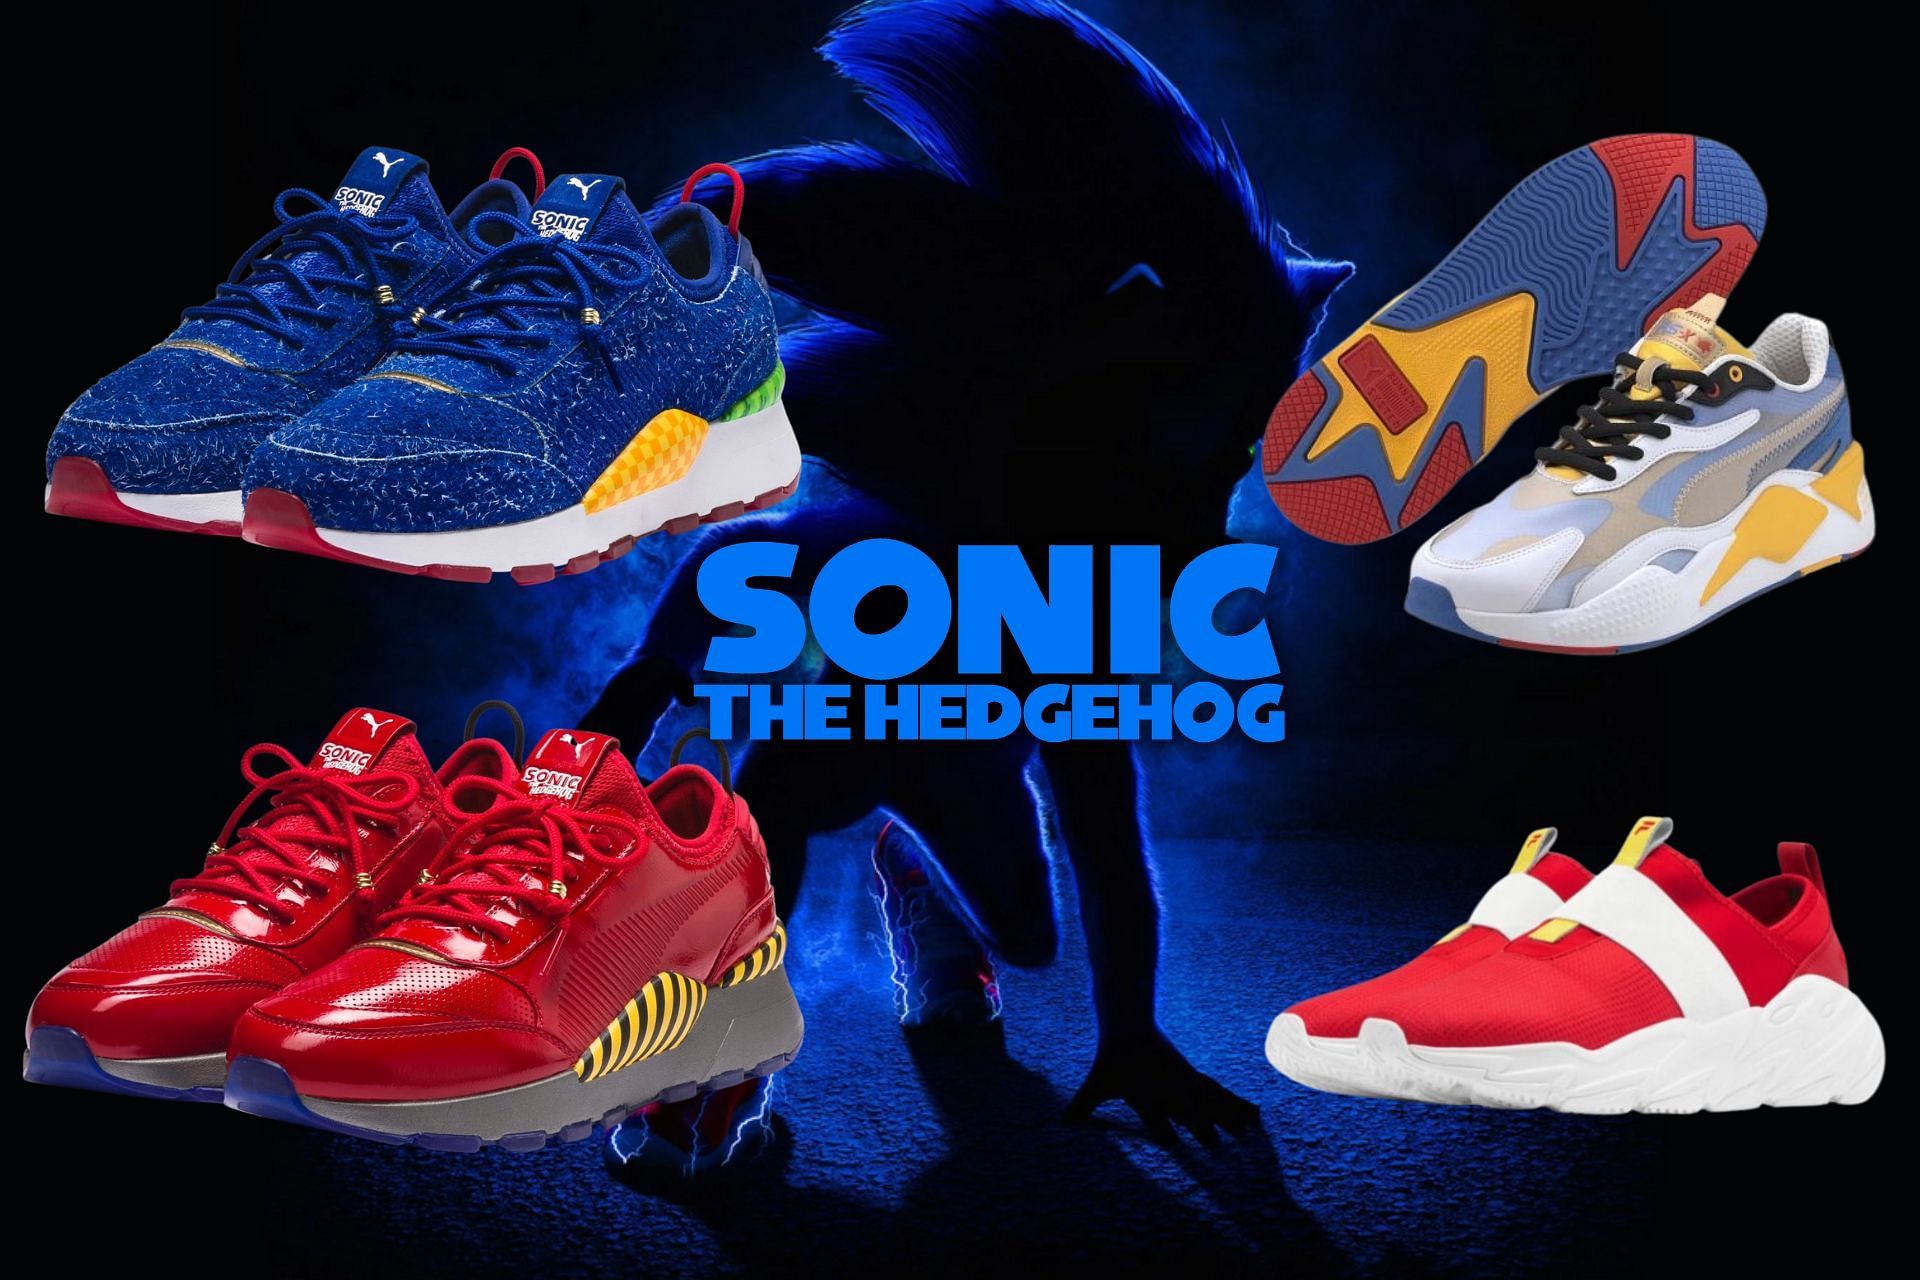 Sonic The Hedgehog 2's Official Sneaker Collab Is Not Great | vlr.eng.br